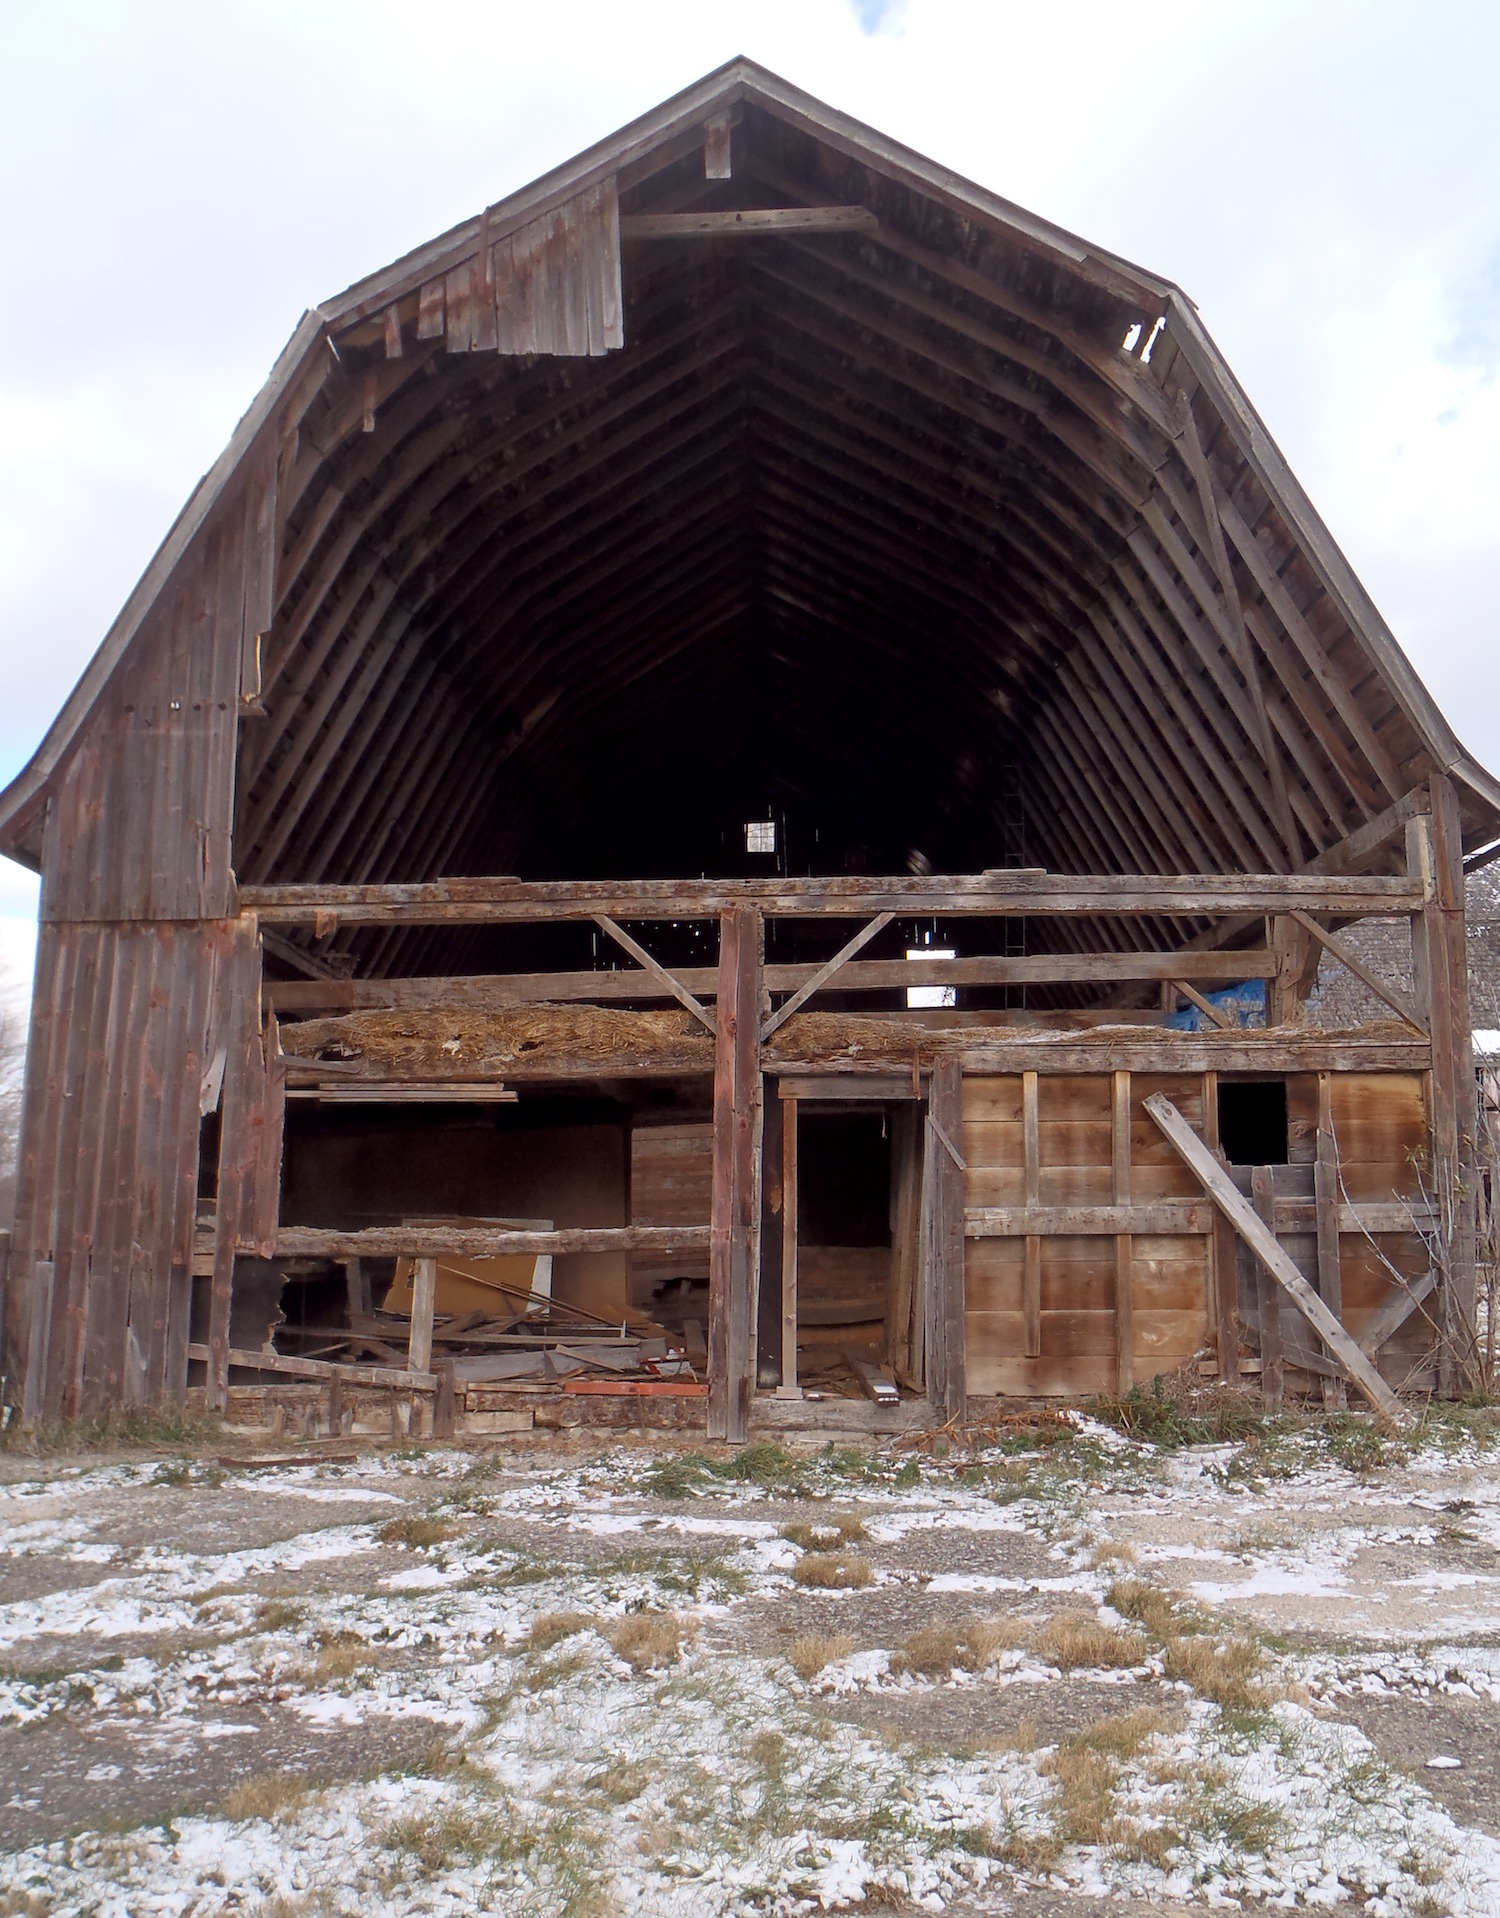 A partially dilapidated barn that is over 100 years old